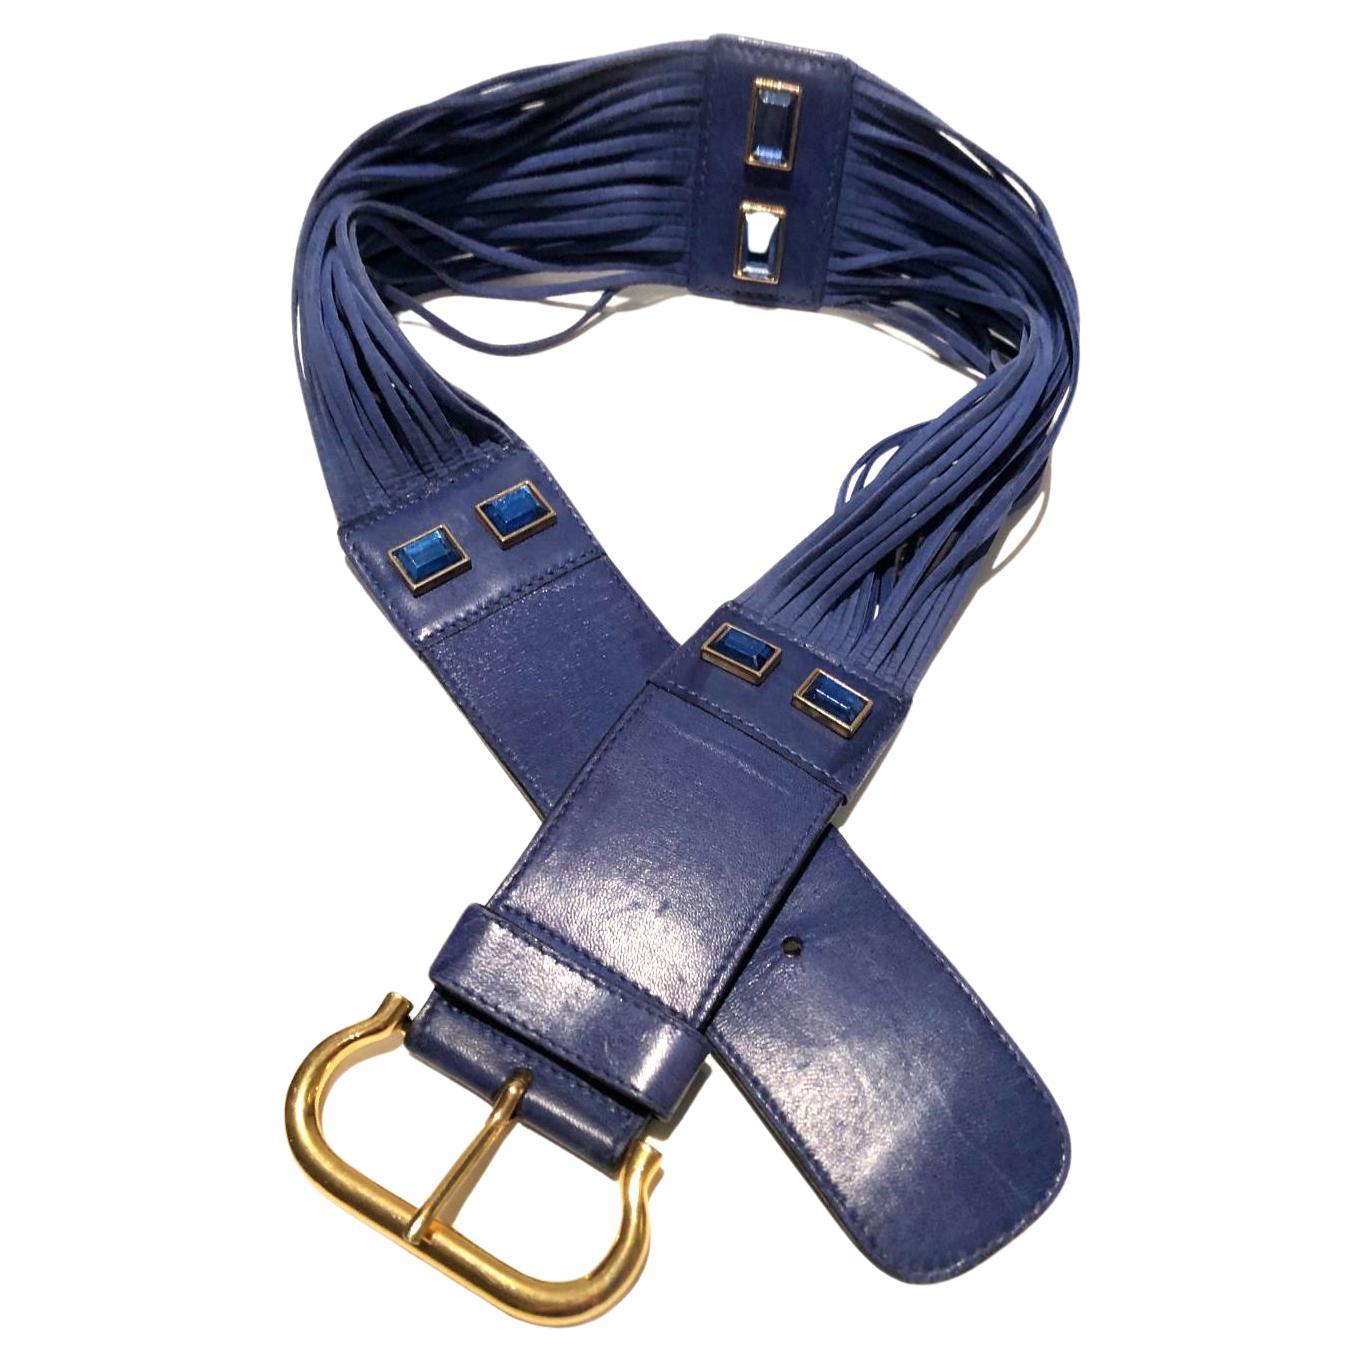 Escada Blue rhinestone leather fringe belt, high waisted in excellent vintage condition, gold tone metal ware, Made in Italy 

Measurements:
- Length: 85cm / 33.4in
- Buckle height: 9cm / 3.4in